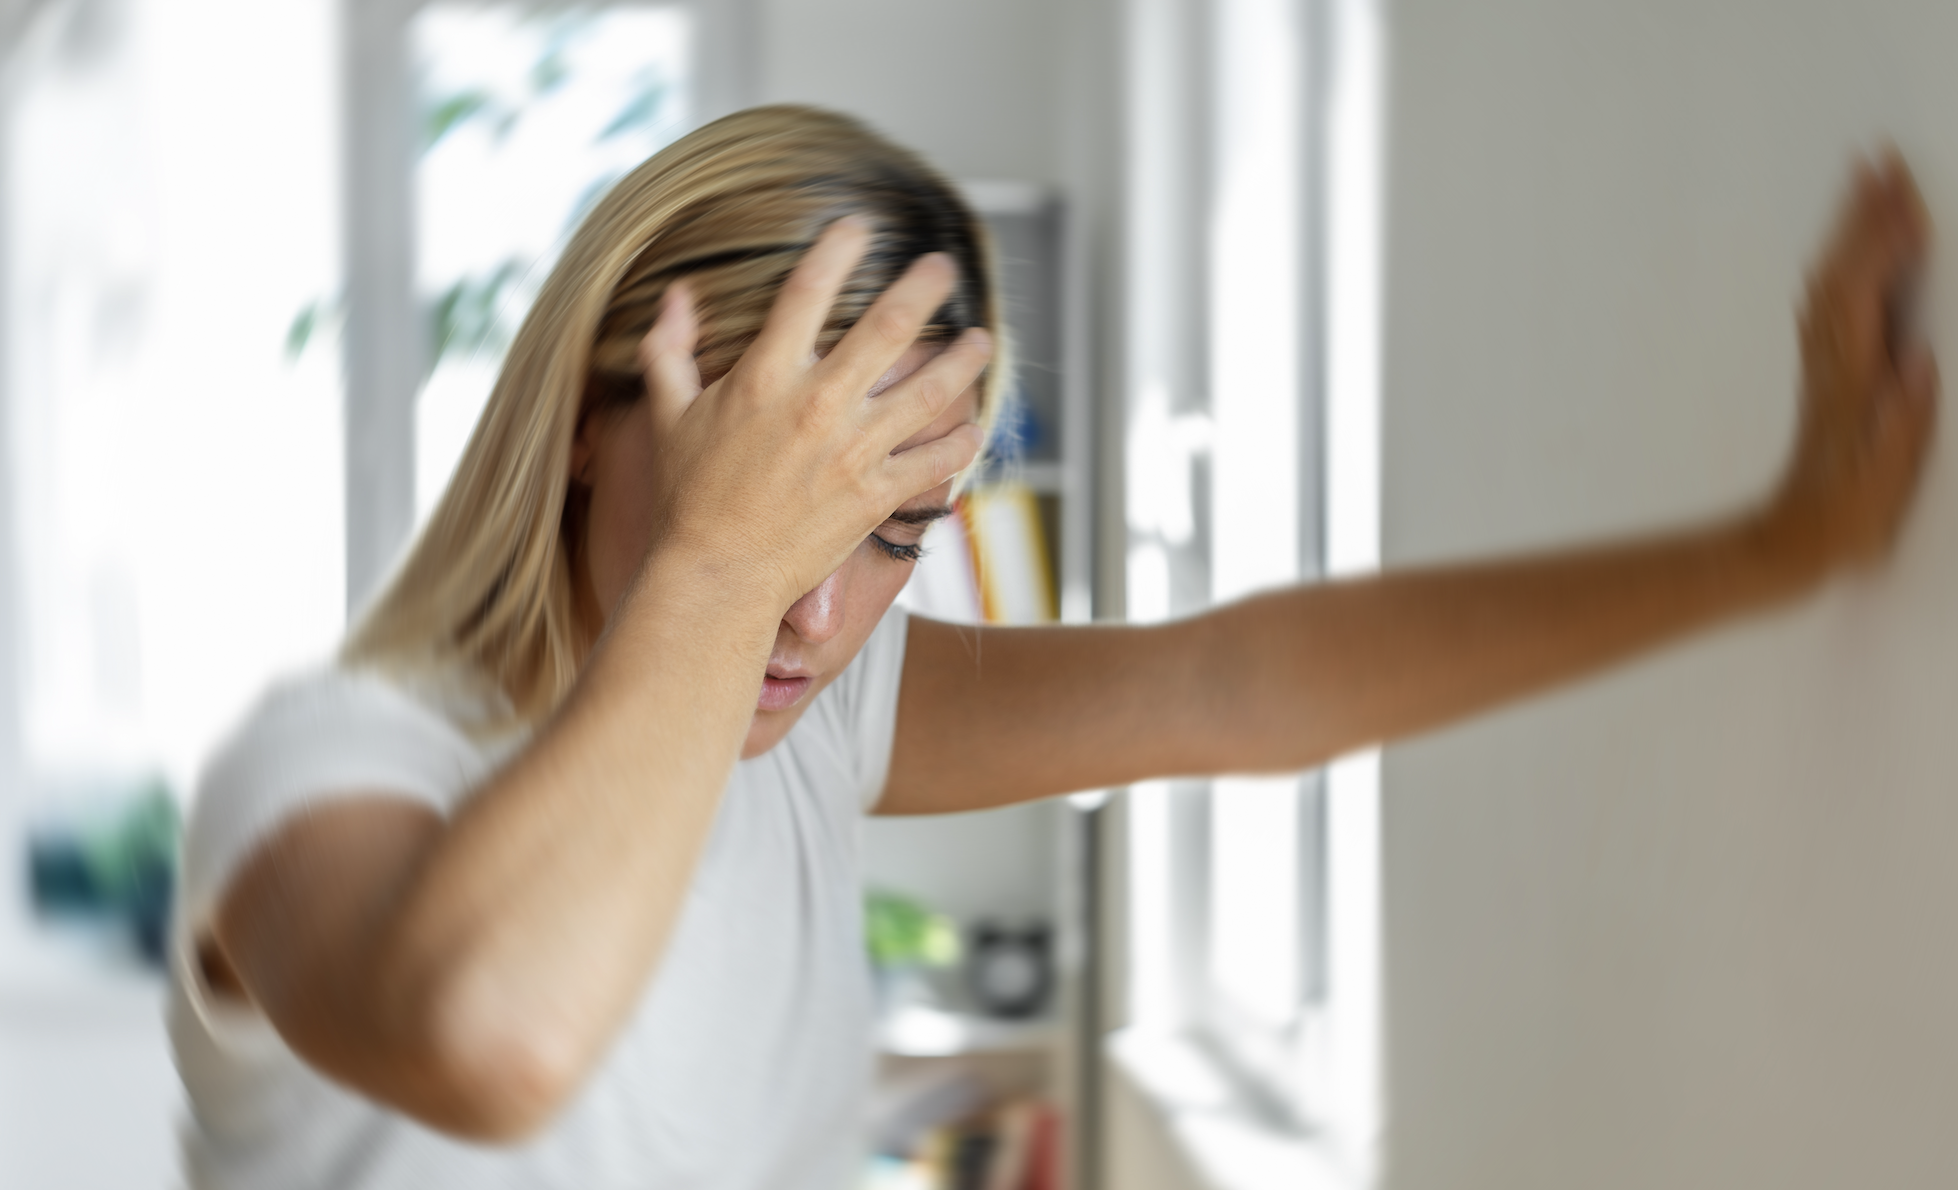 Person looking stressed with hands on head near a window, conveying emotion for a wellness article